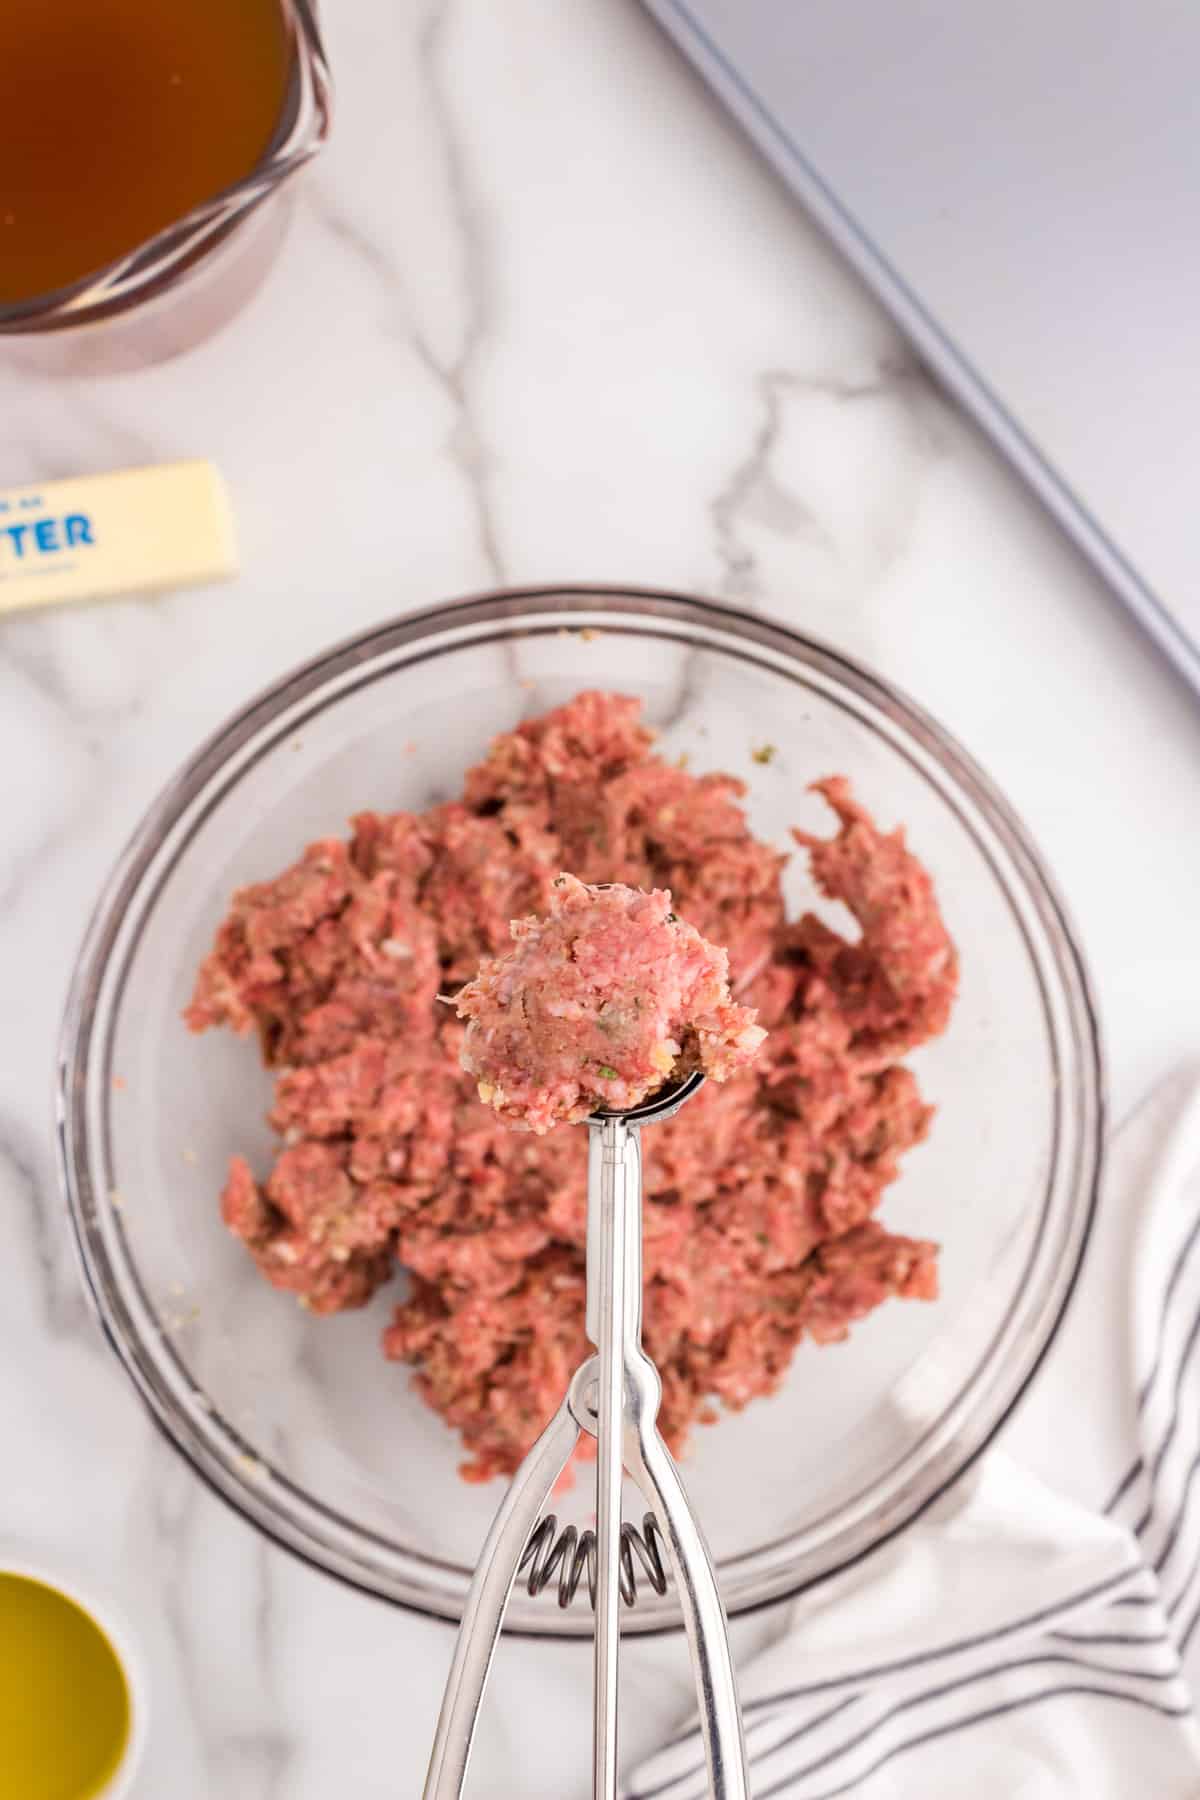 Cookie scoop with meatball mixture in it